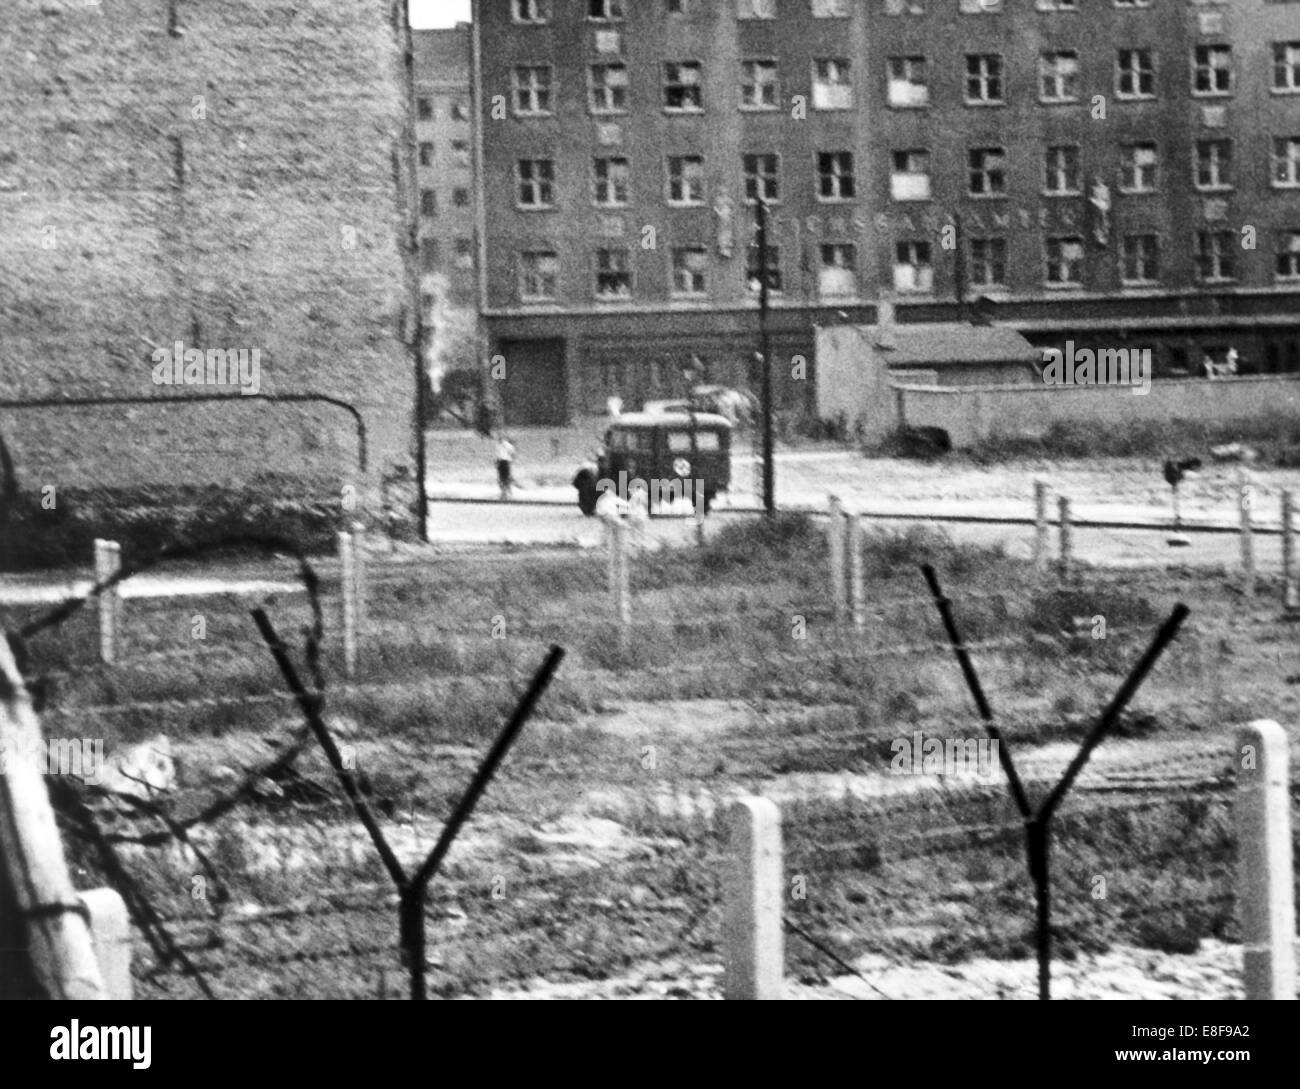 View over Berlin Wall on the ambulance car which evacuated the victim. A 40 to 50 year old man got shot by East Berlin border guards during his escape attempt on the cemetery at the border corner Bernauer Street/ Berg Street on 4th September 1962. The Federal Republic of Germany and the German Democratic Republic were split into west and east by an iron curtain from 13th August 1961, the day of the building of Berlin Wall, to the fall of the wall on 9th November 1989. Stock Photo